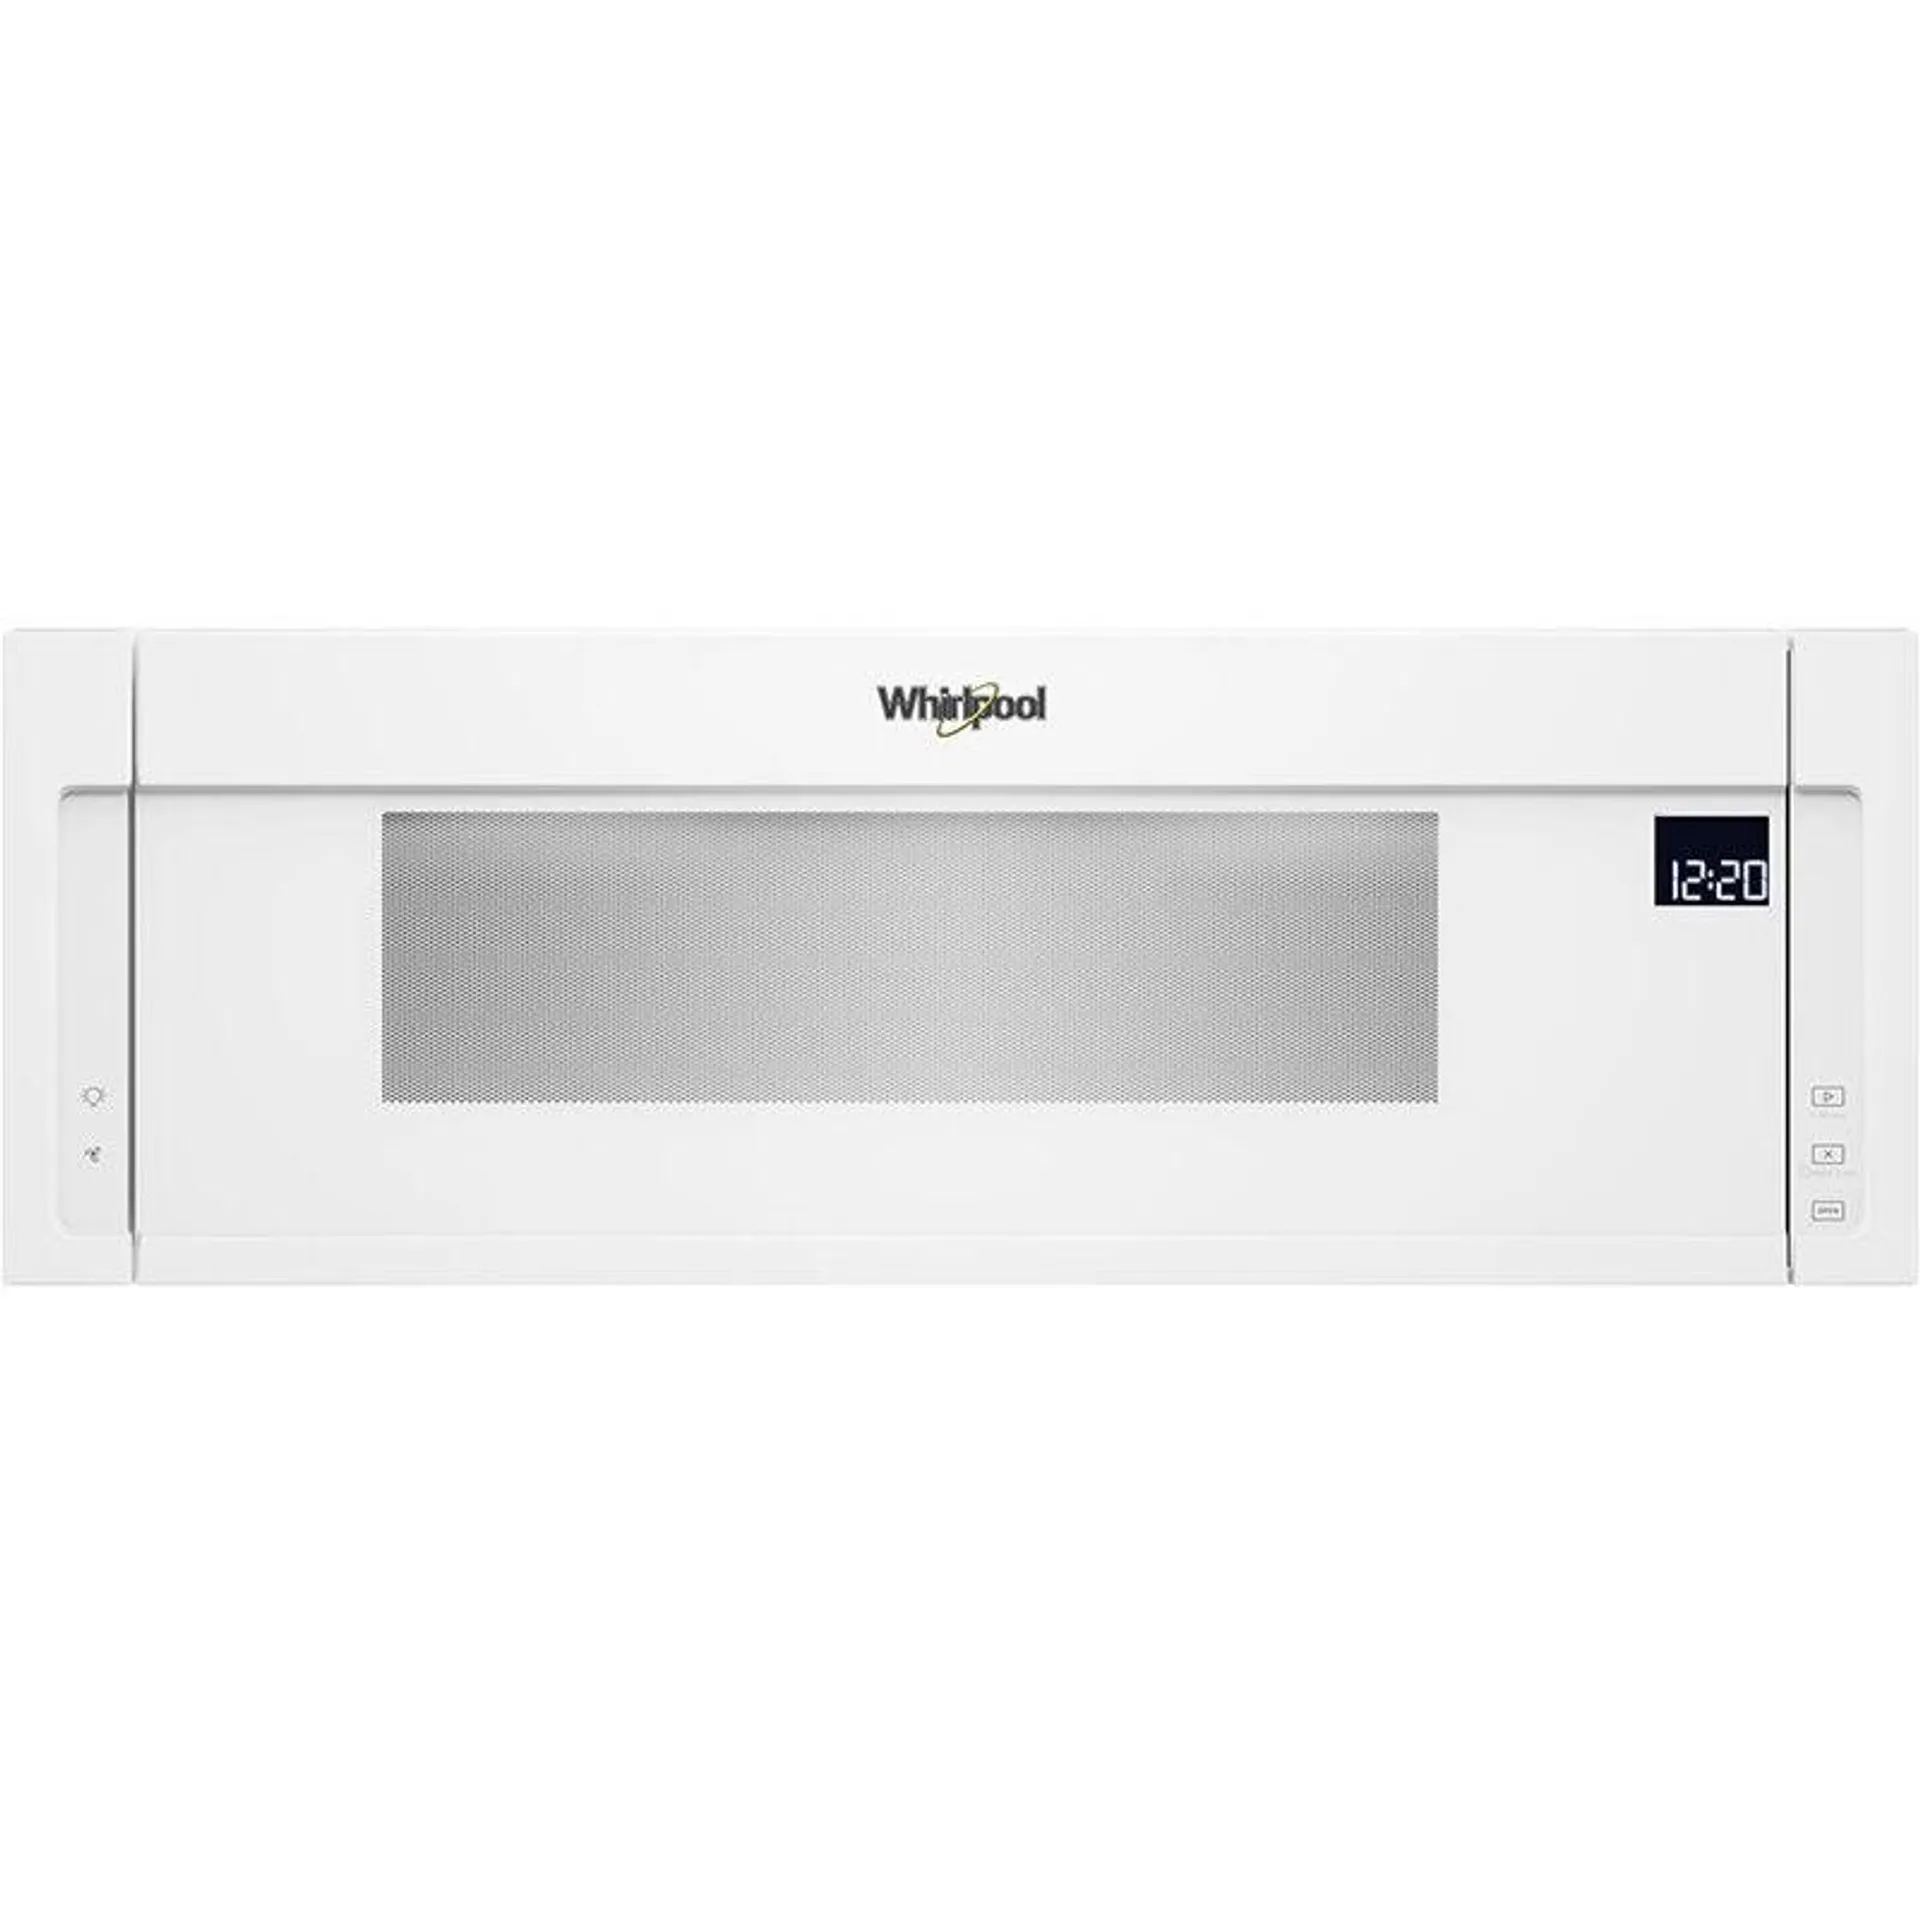 Whirlpool 30" 1.1 Cu. Ft. Over-the-Range Microwave with 10 Power Levels, 400 CFM & Sensor Cooking Controls - White